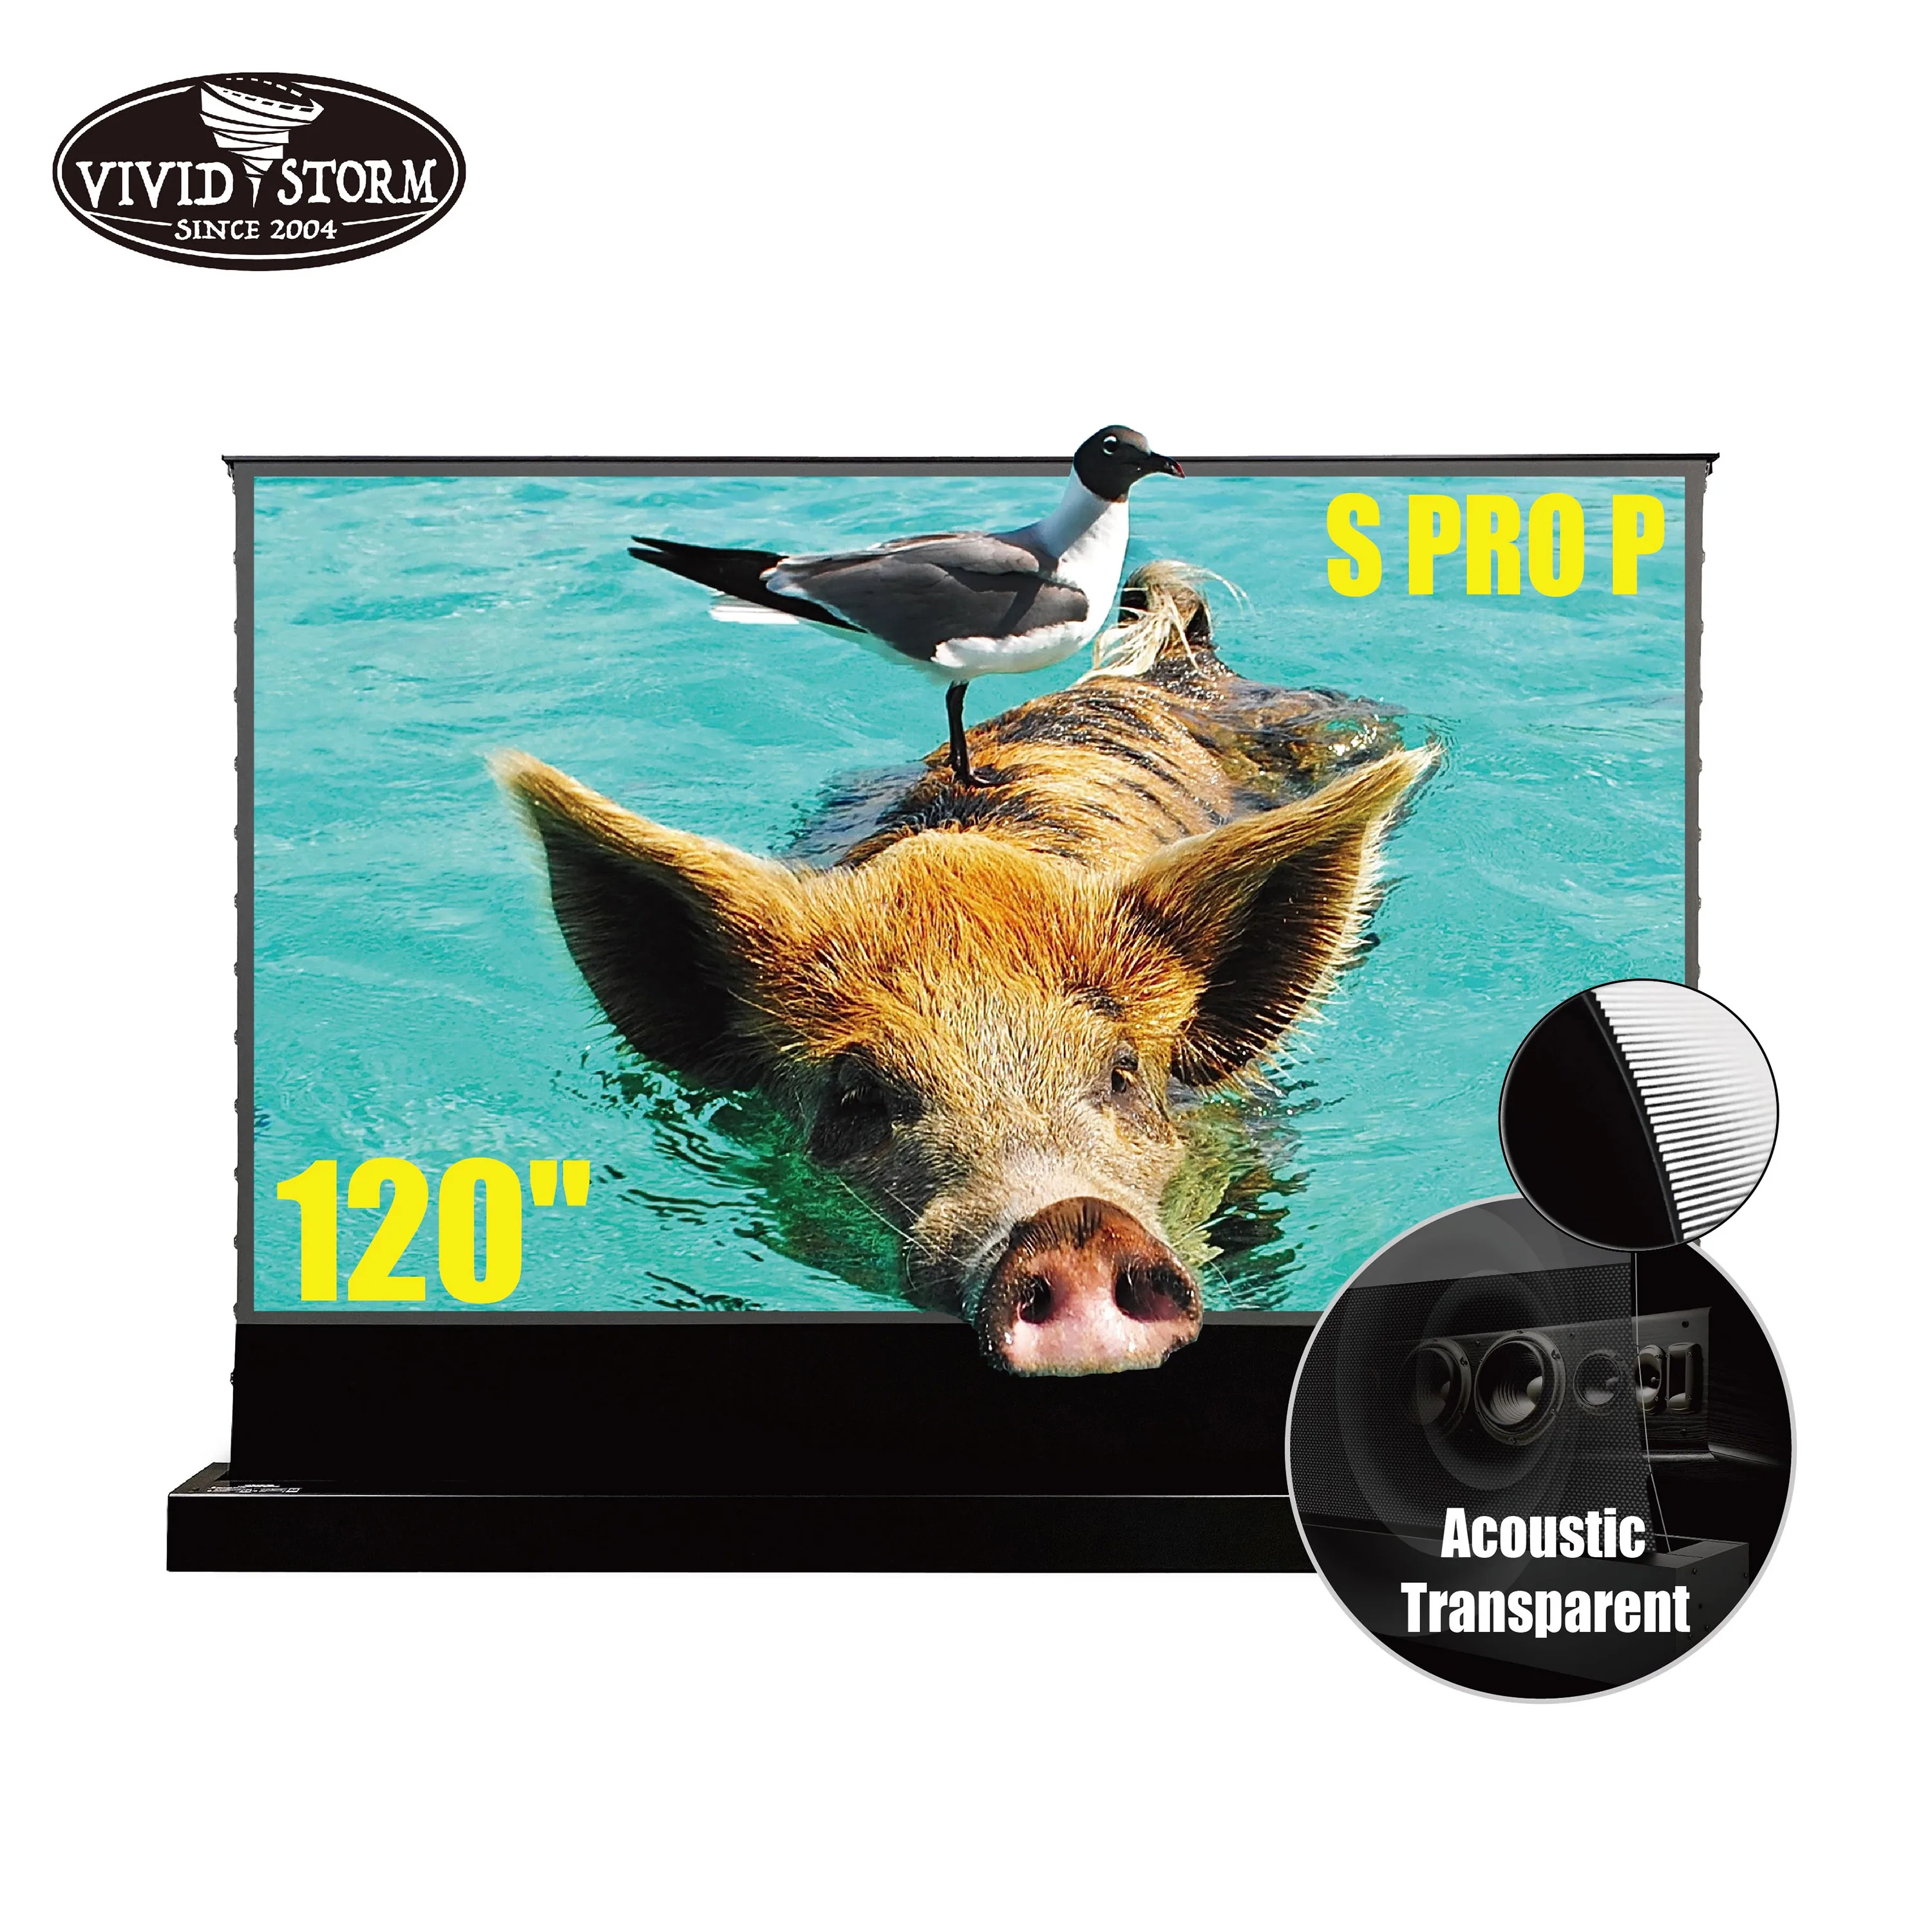 

VIVIDSTORM S PRO P 120 inch Sound Transparent Perforated Portable ambient light rejecting 4k UHD Laser projector screen